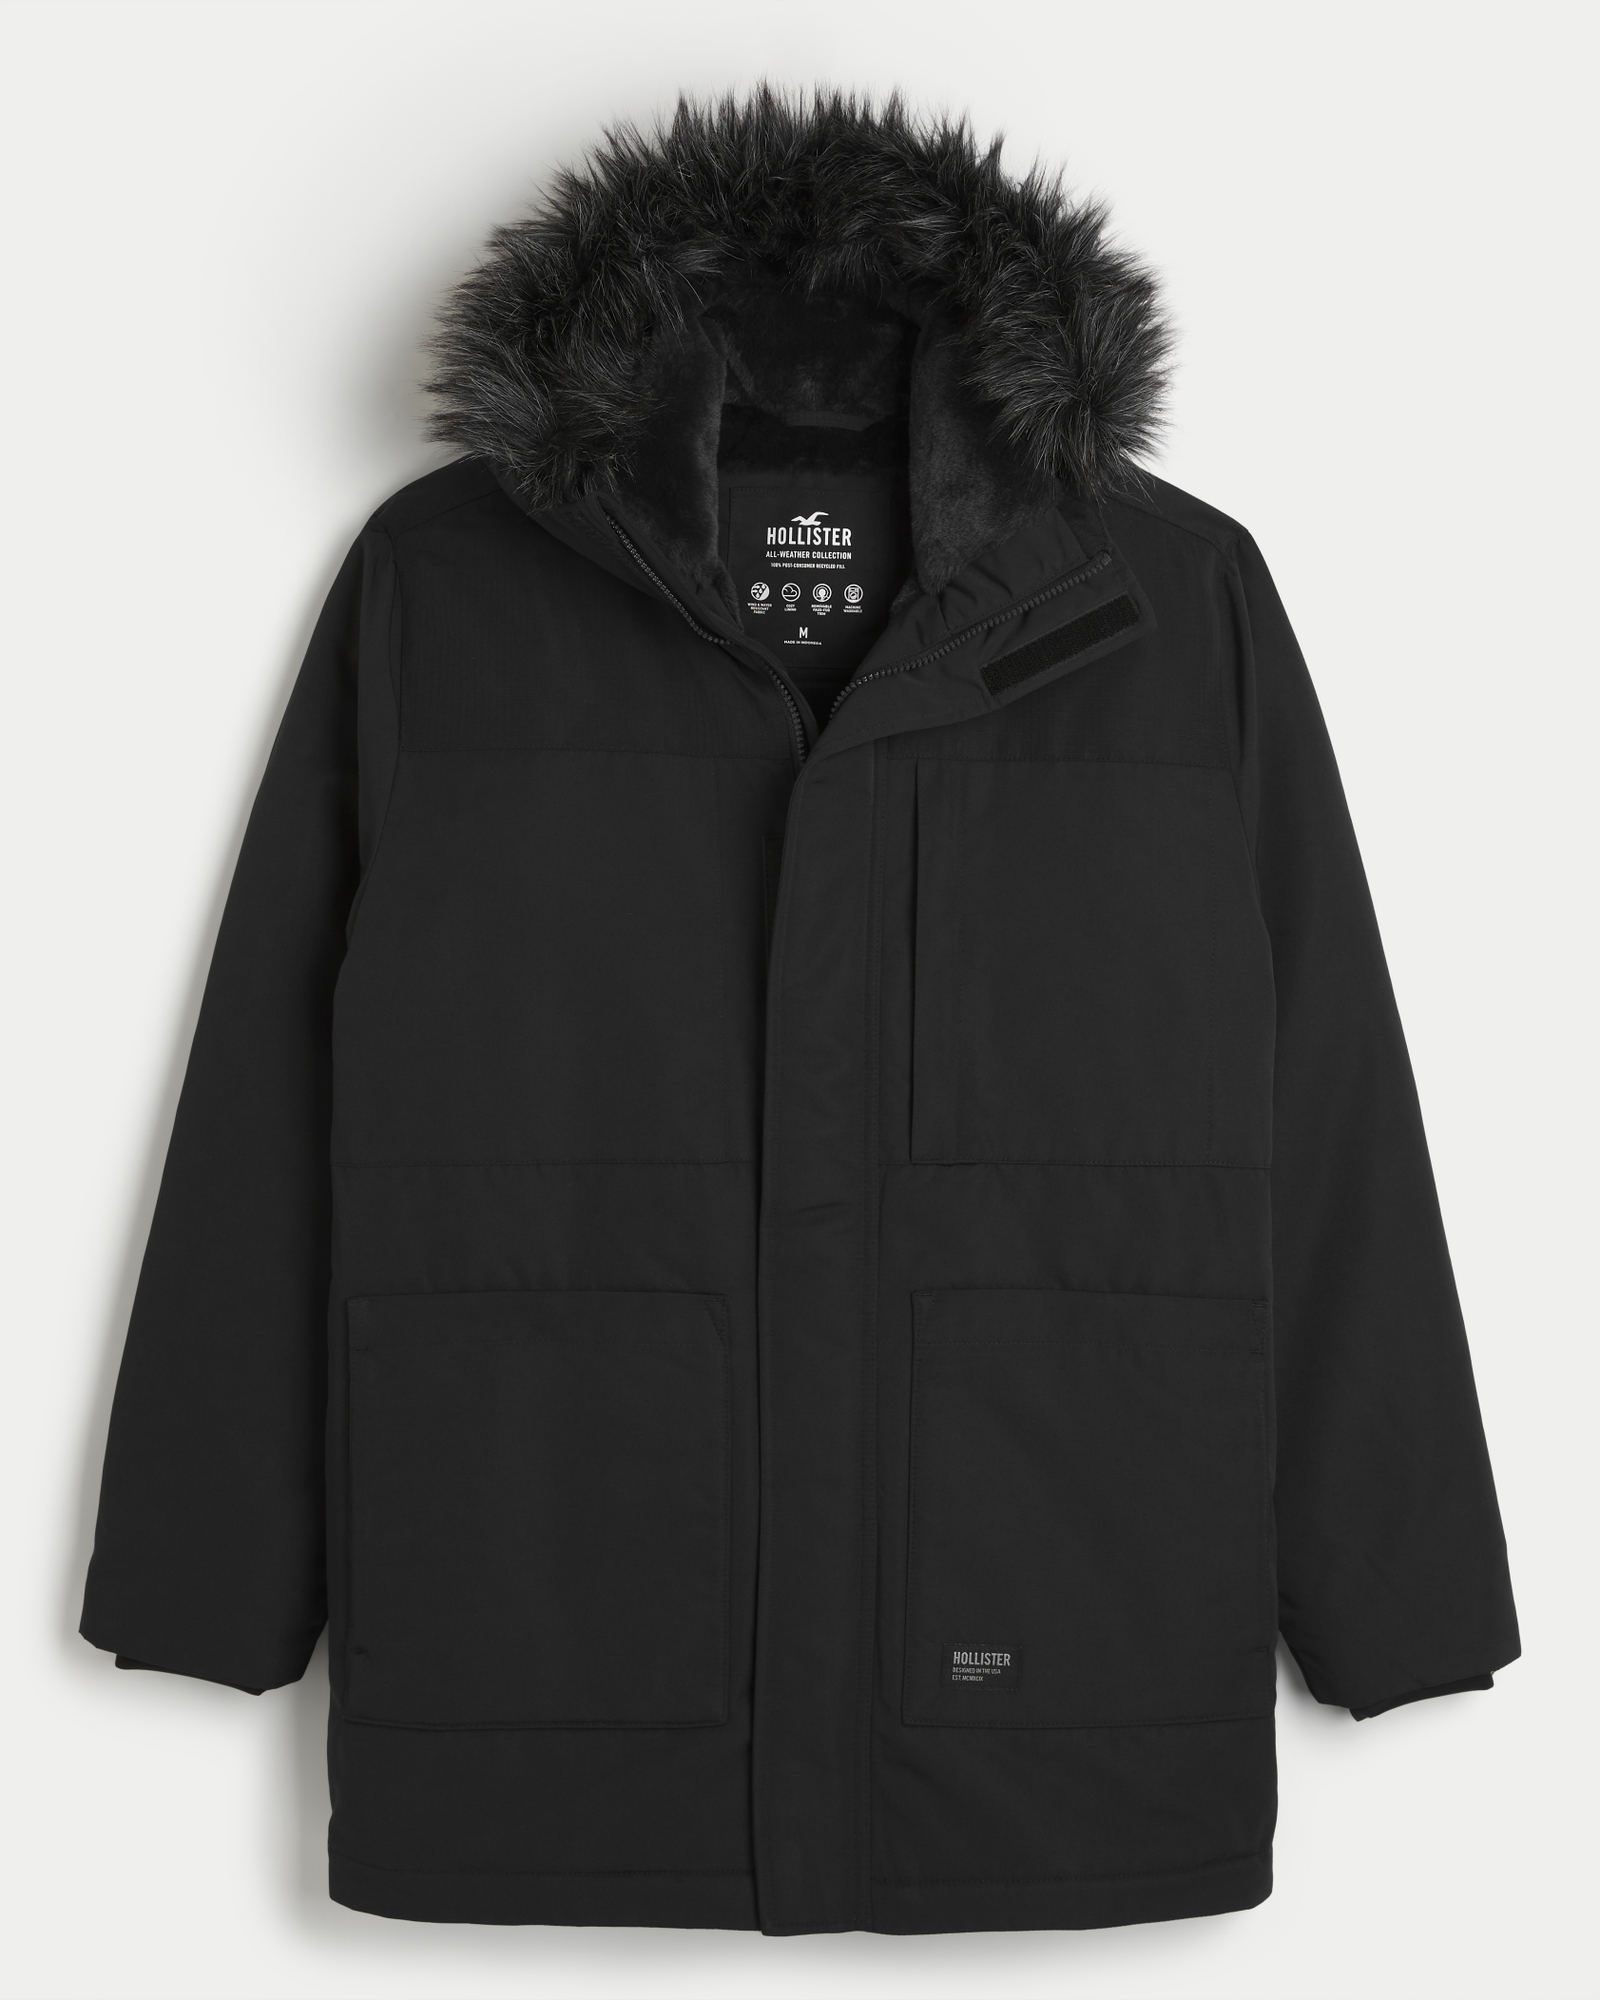 Hollister All Weather Jacket  Hollister clothes, All weather jackets,  Fashion